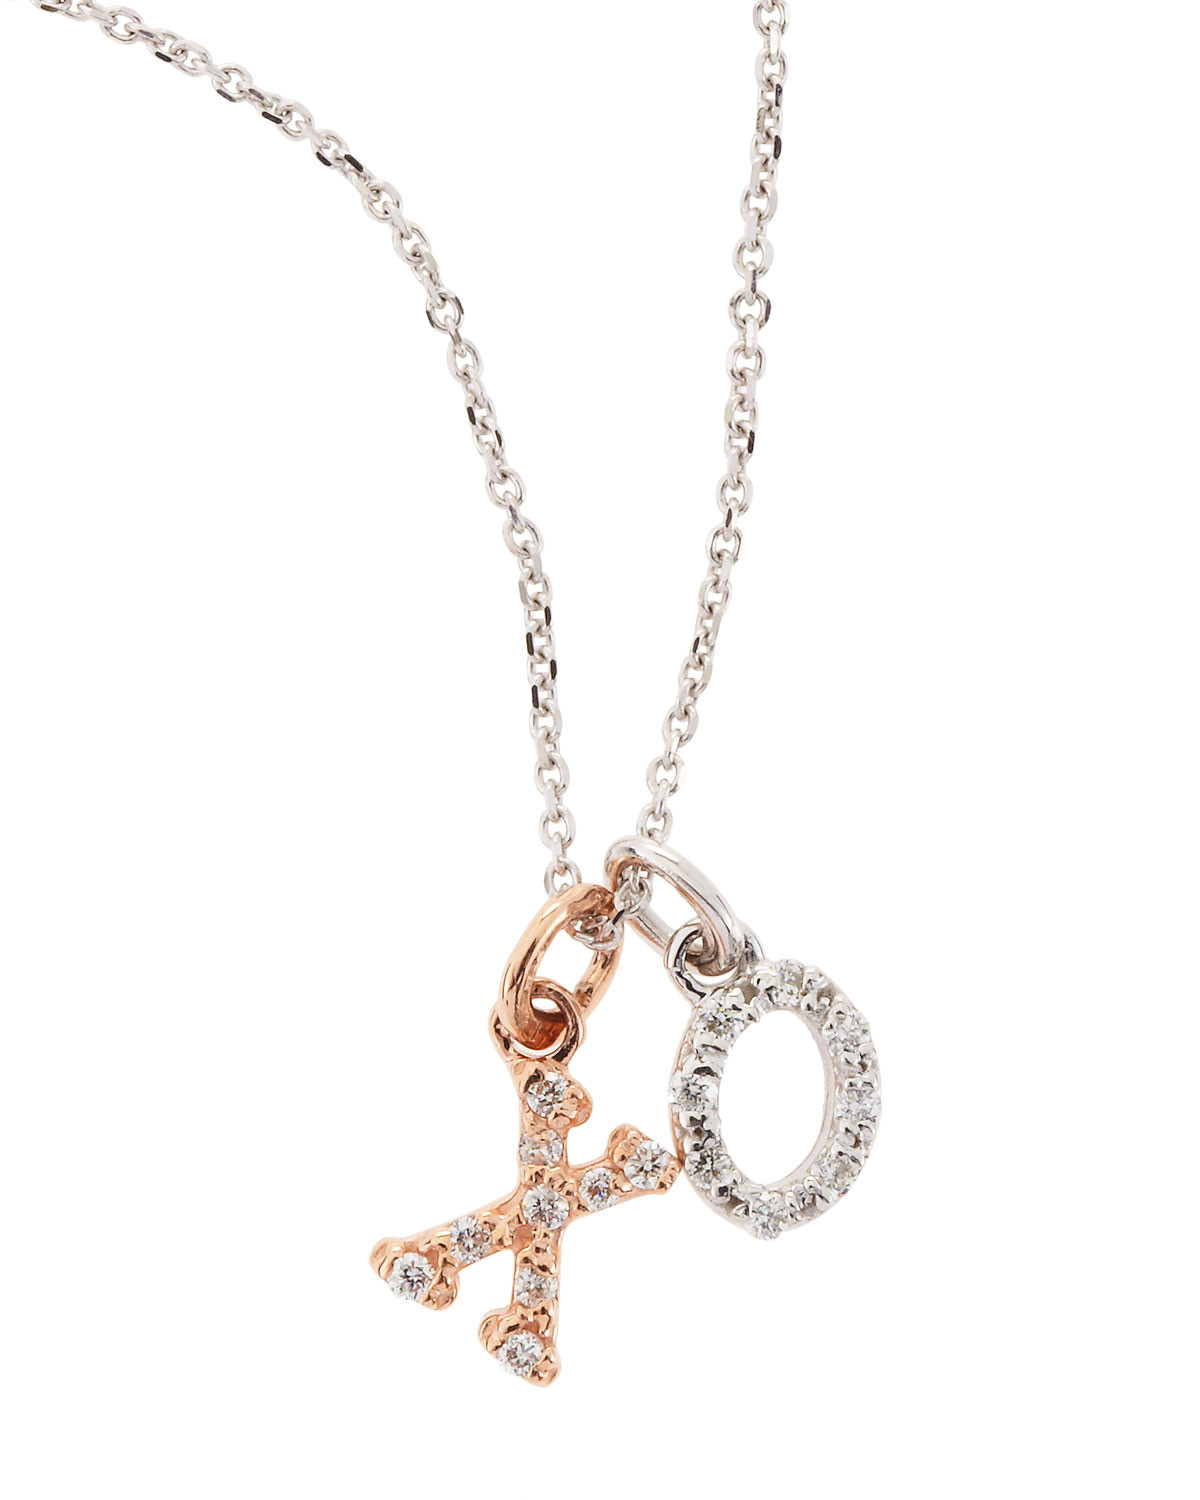 Xo Necklace Gold
 Lyst Kc Designs 14k White & Rose Gold Xo Necklace in White